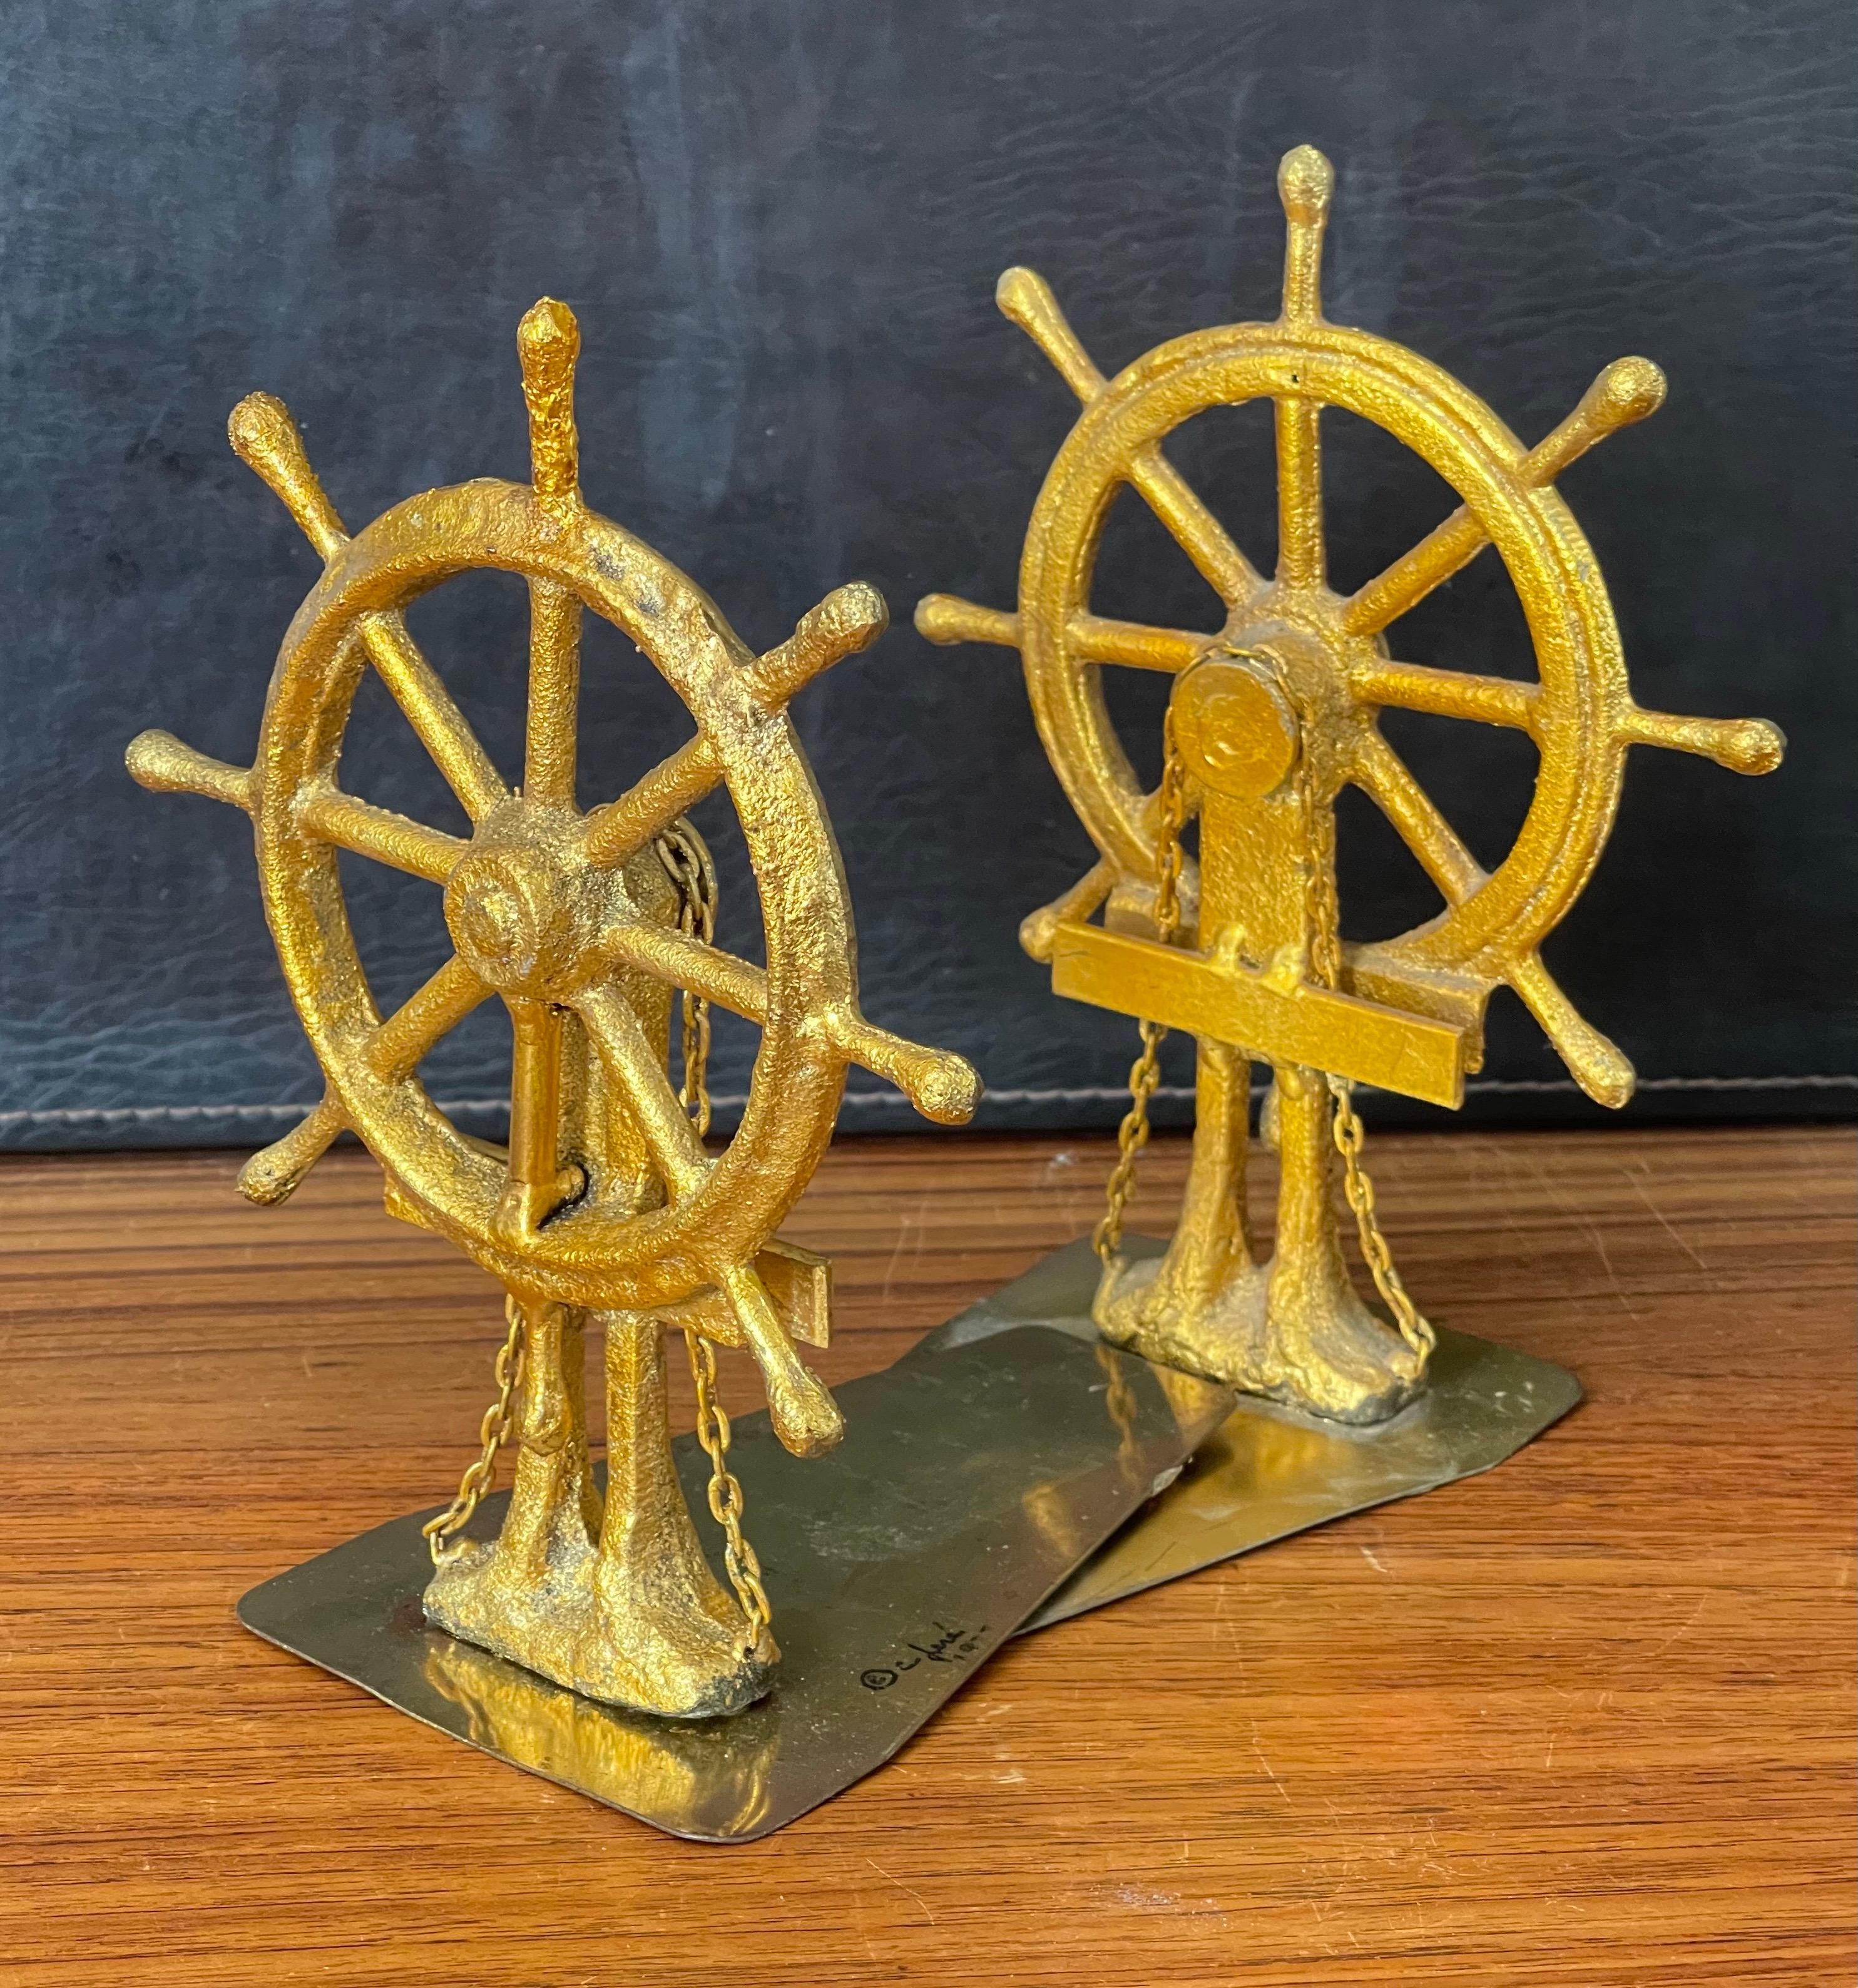 American Pair of Ship Wheel Bookends in Gold Leaf Finish by Curtis Jere for Artisan House